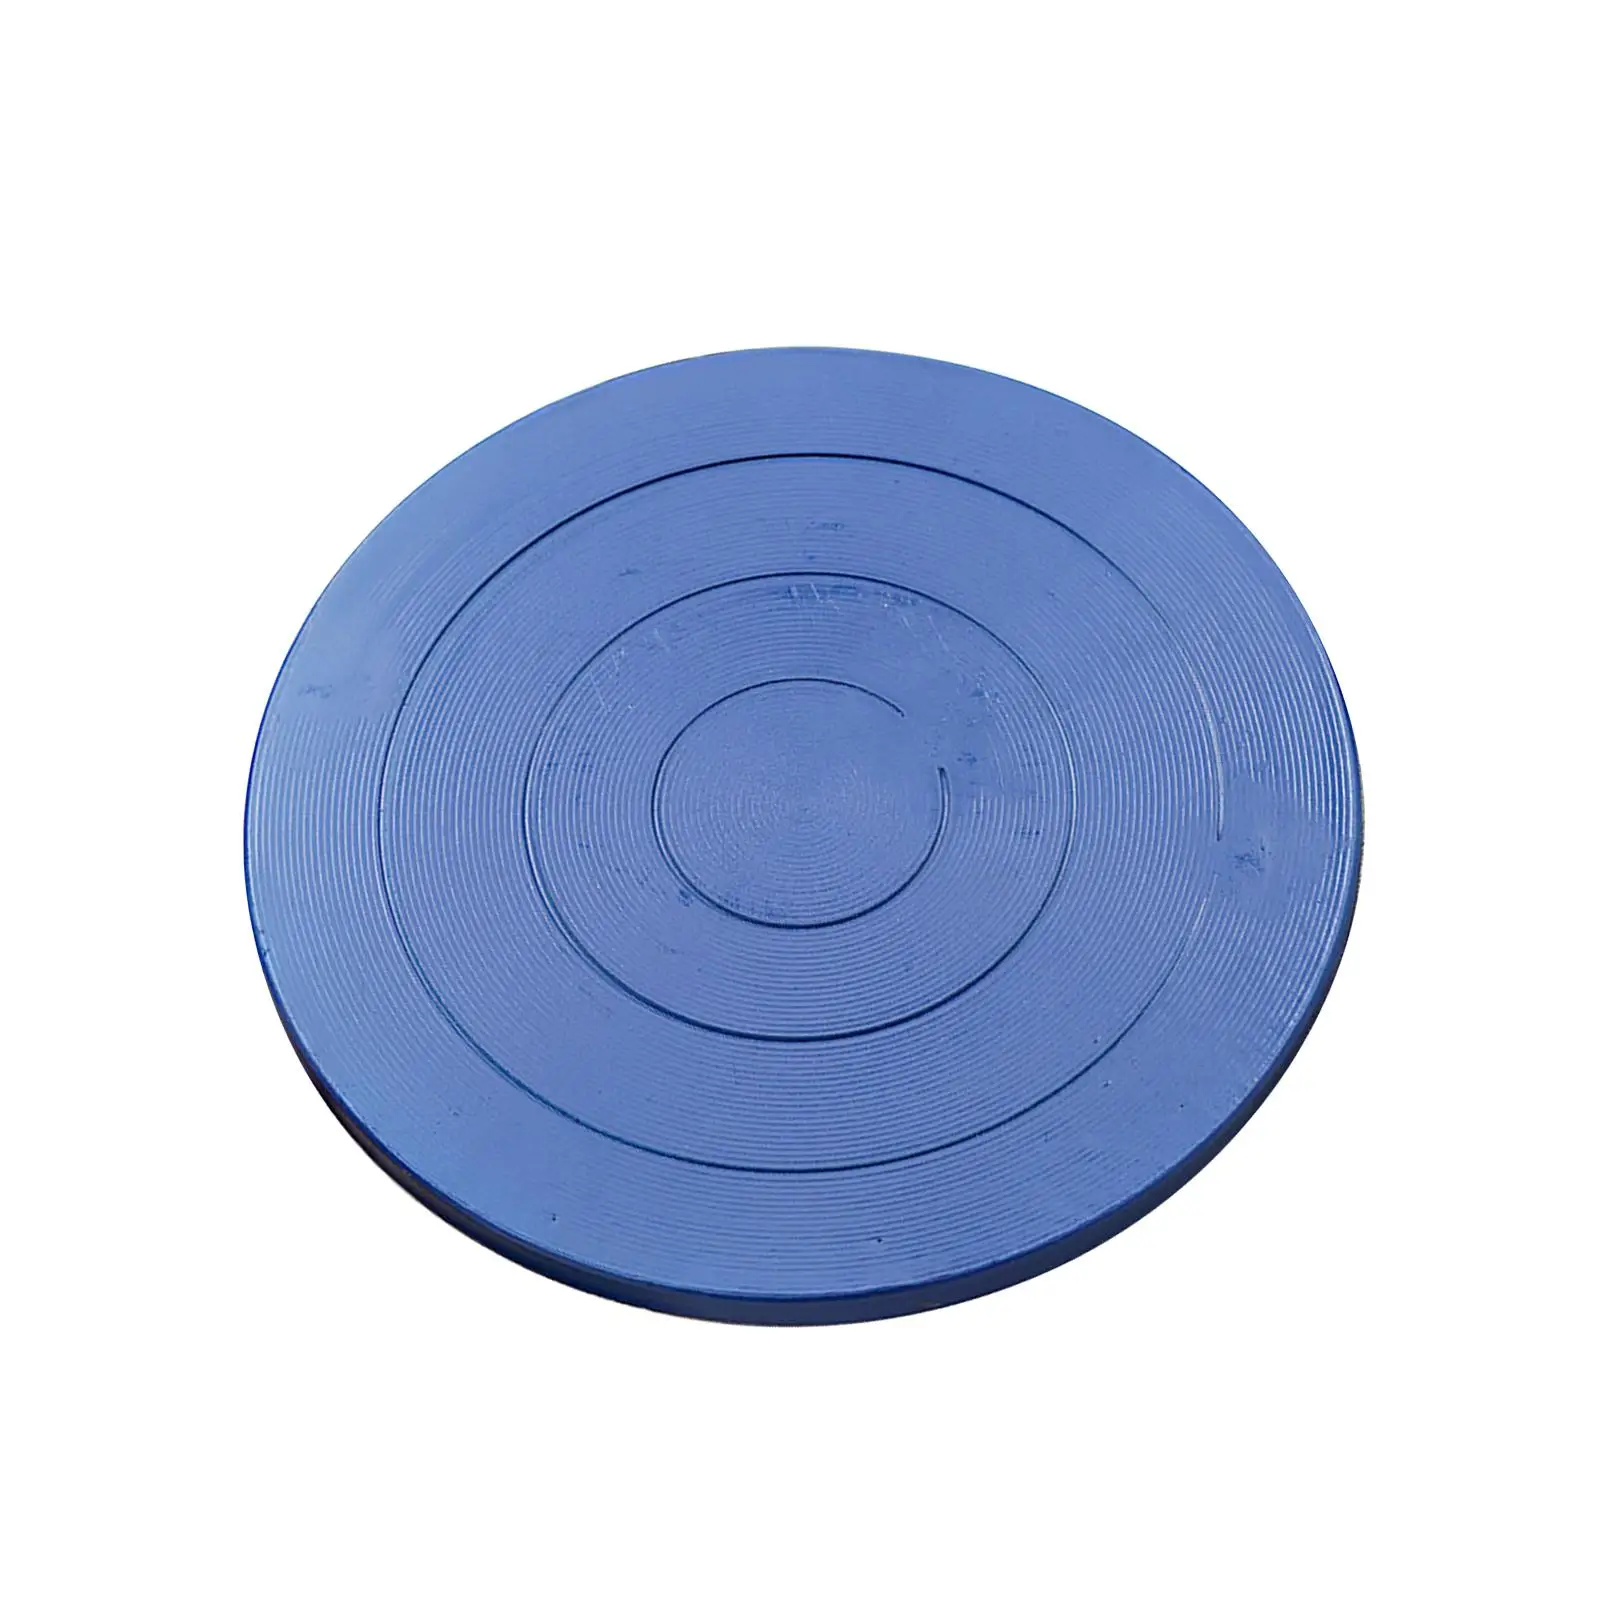 Sculpting Wheel Turntable Banding Wheel Arts Supply Double Side Heavy Duty Cake Decorating Clay Ceramics Pottery Sculpting Wheel